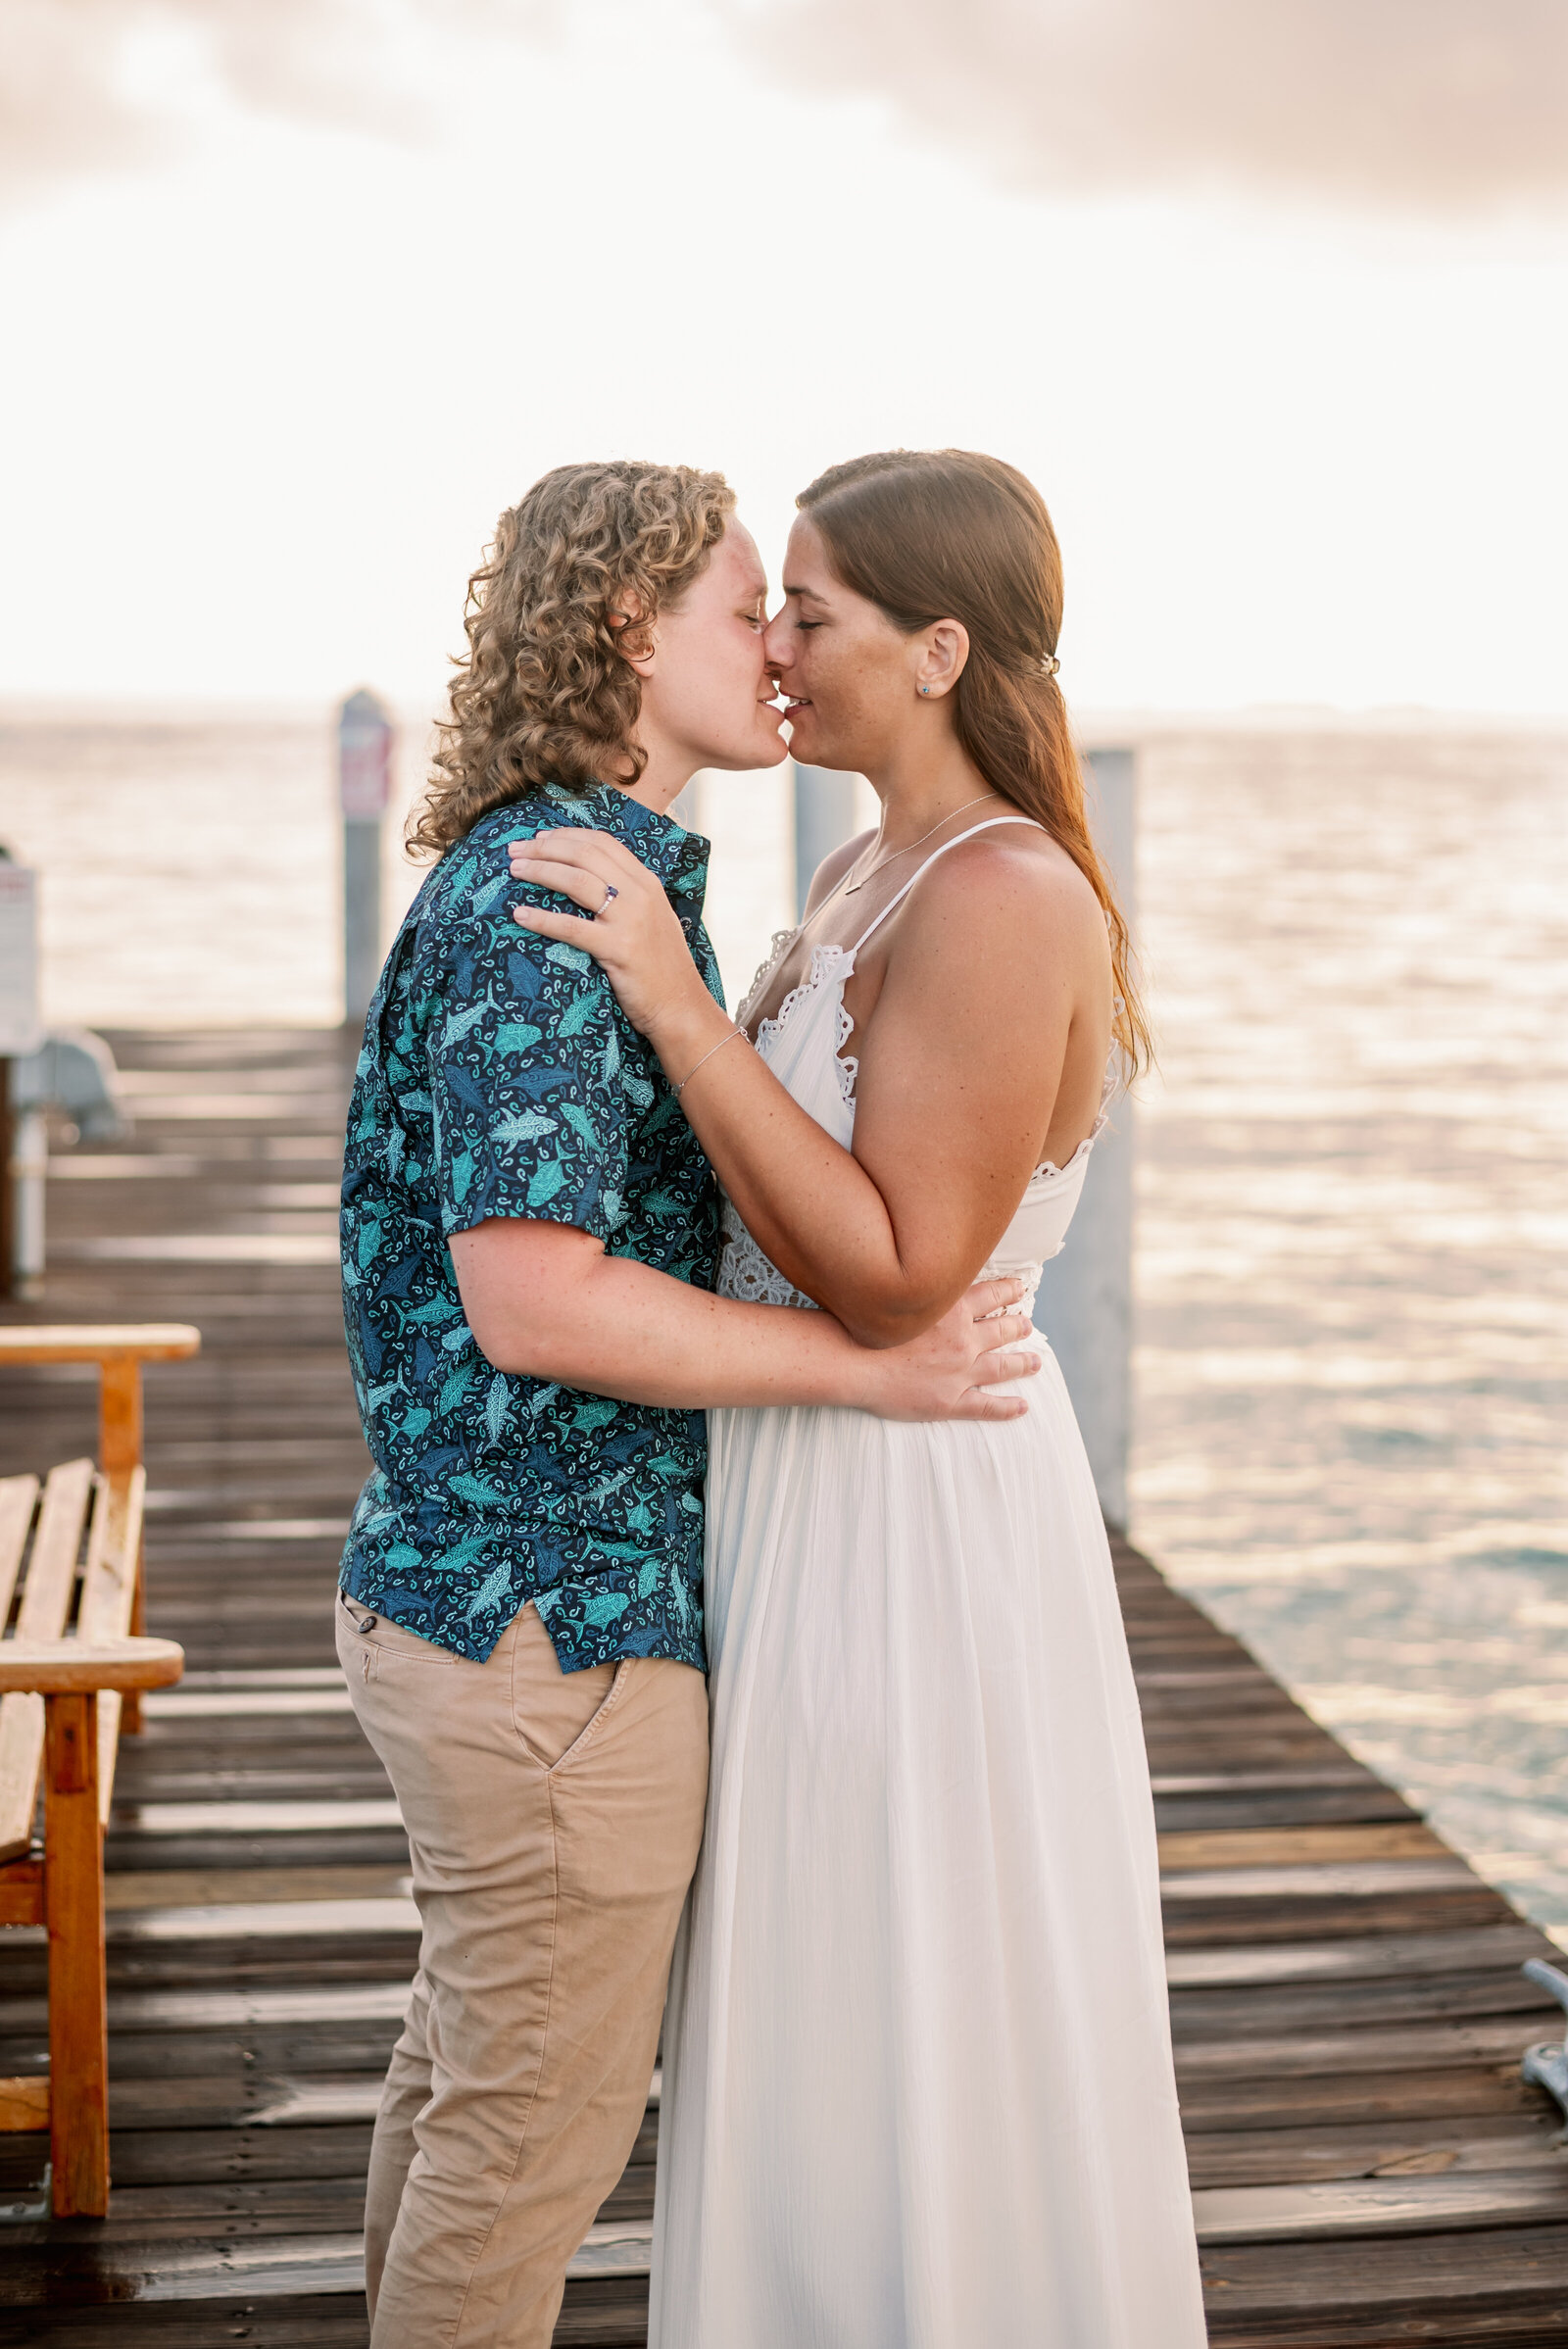 LGBTQ engaged couple standing on a dock during sunset in an embrace and about to kiss